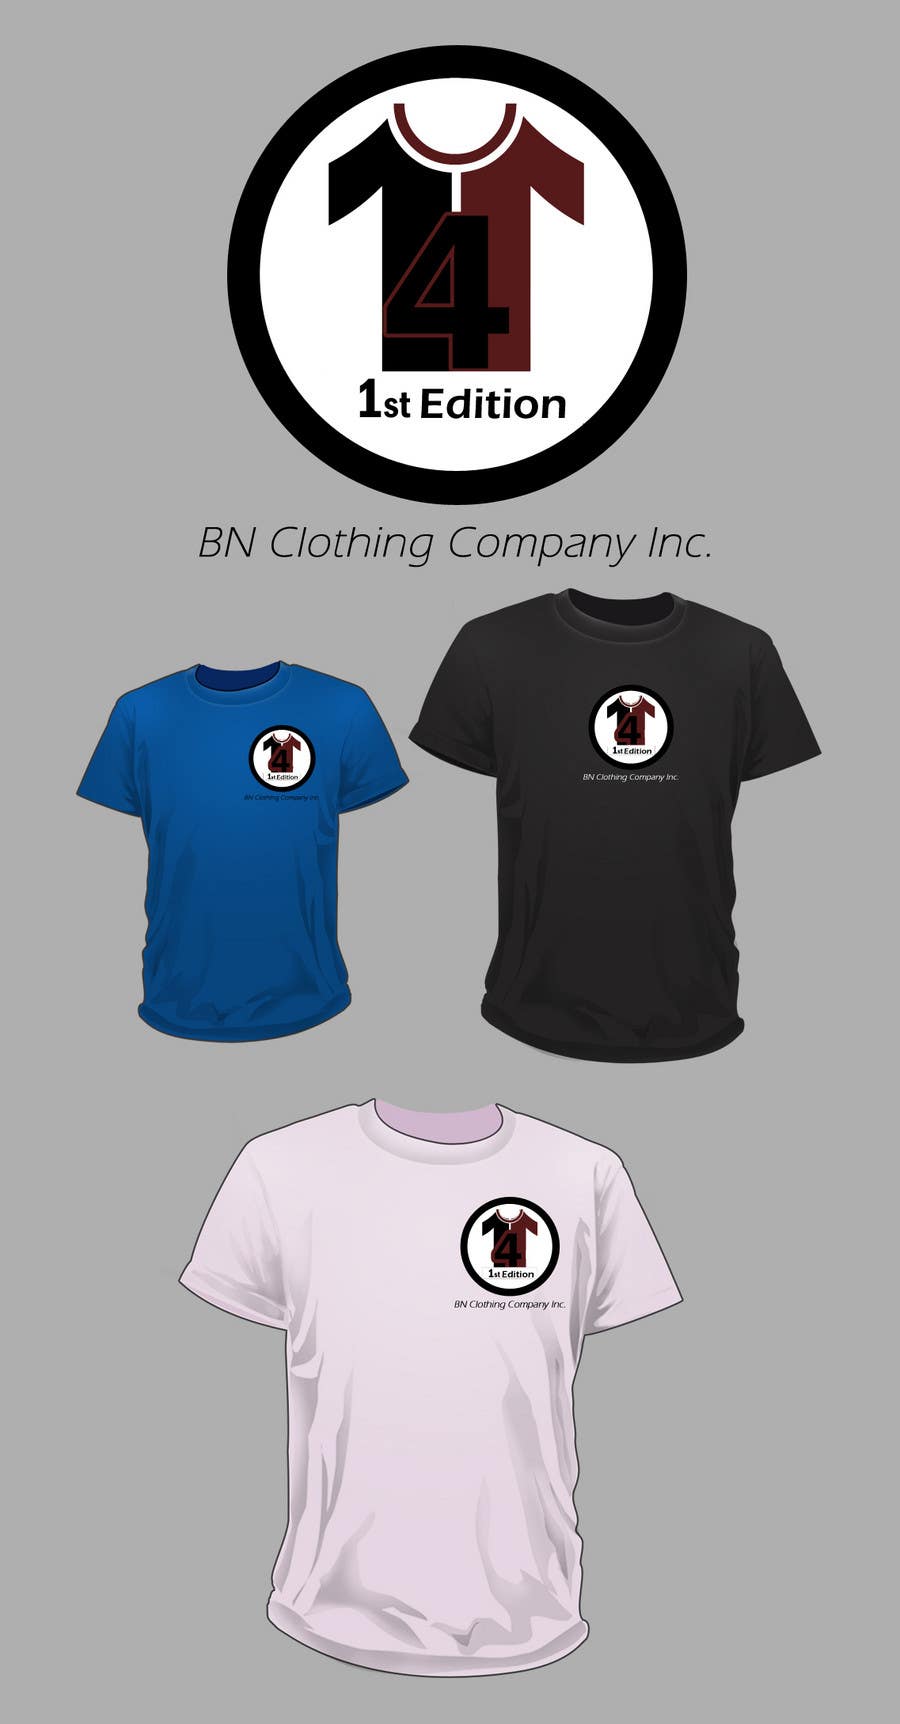 Proposition n°136 du concours                                                 T-shirt Design for The BN Clothing Company Inc.
                                            